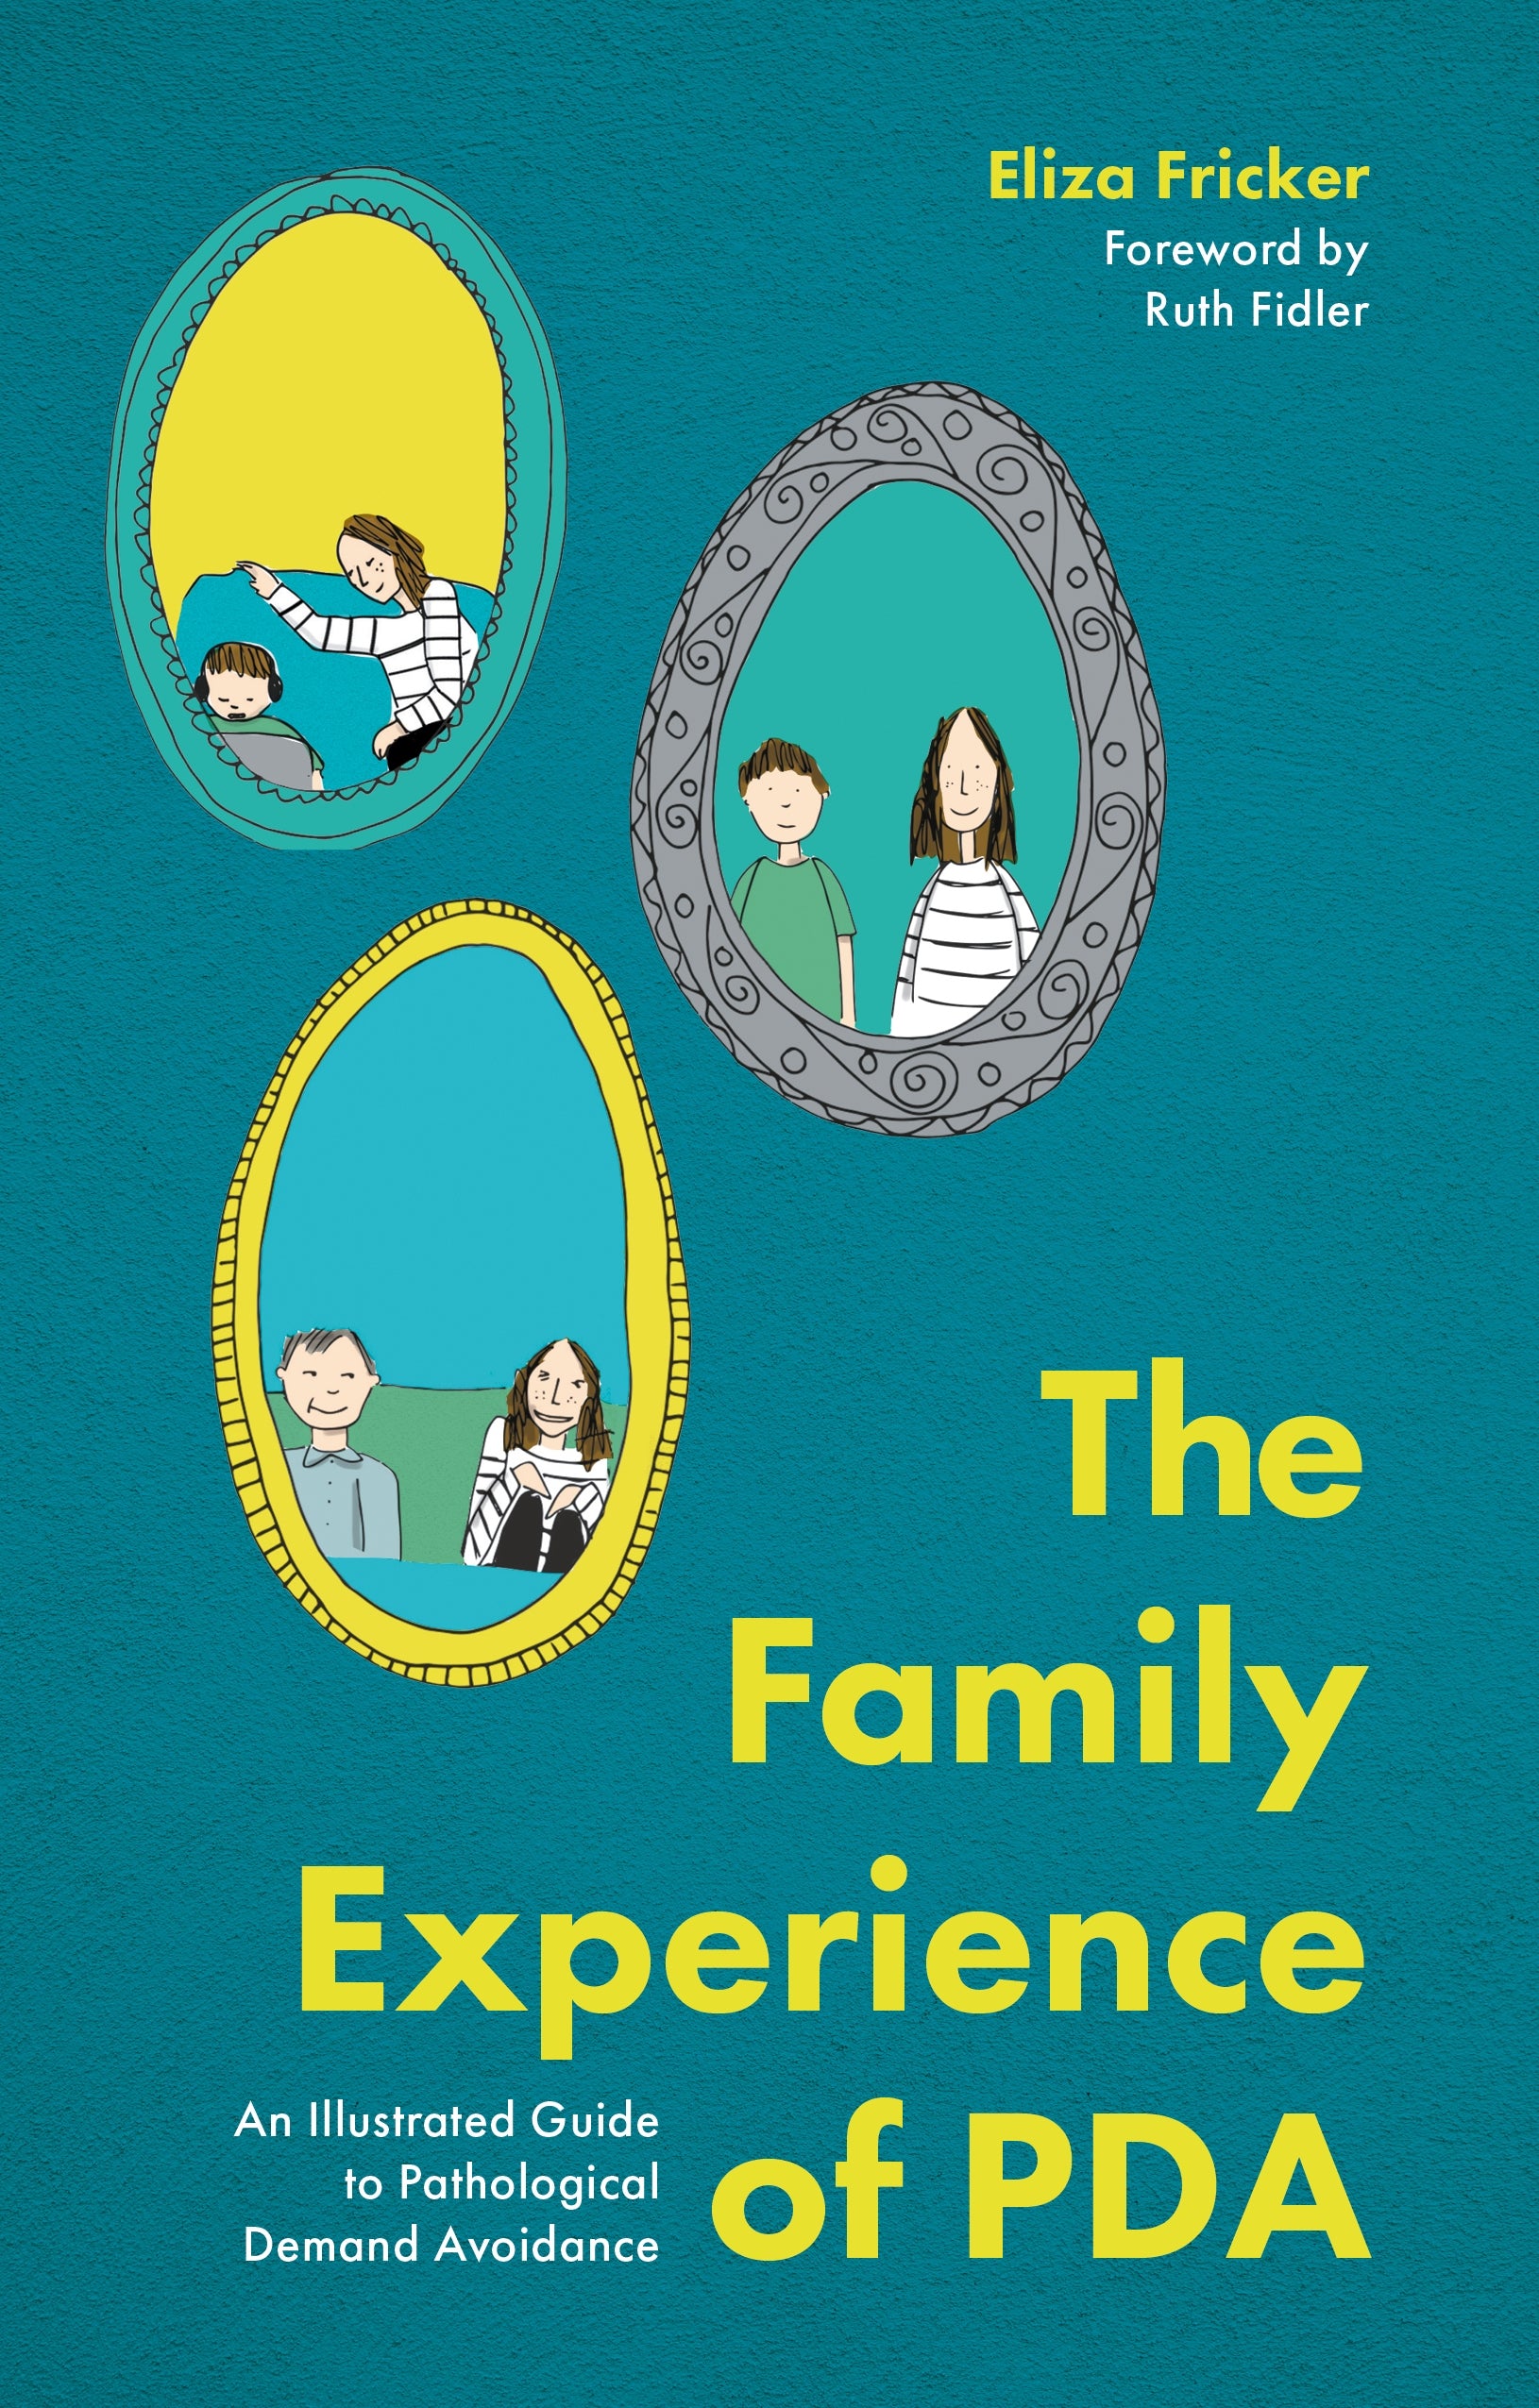 The Family Experience of PDA by Eliza Fricker, Eliza Fricker, Ruth Fidler